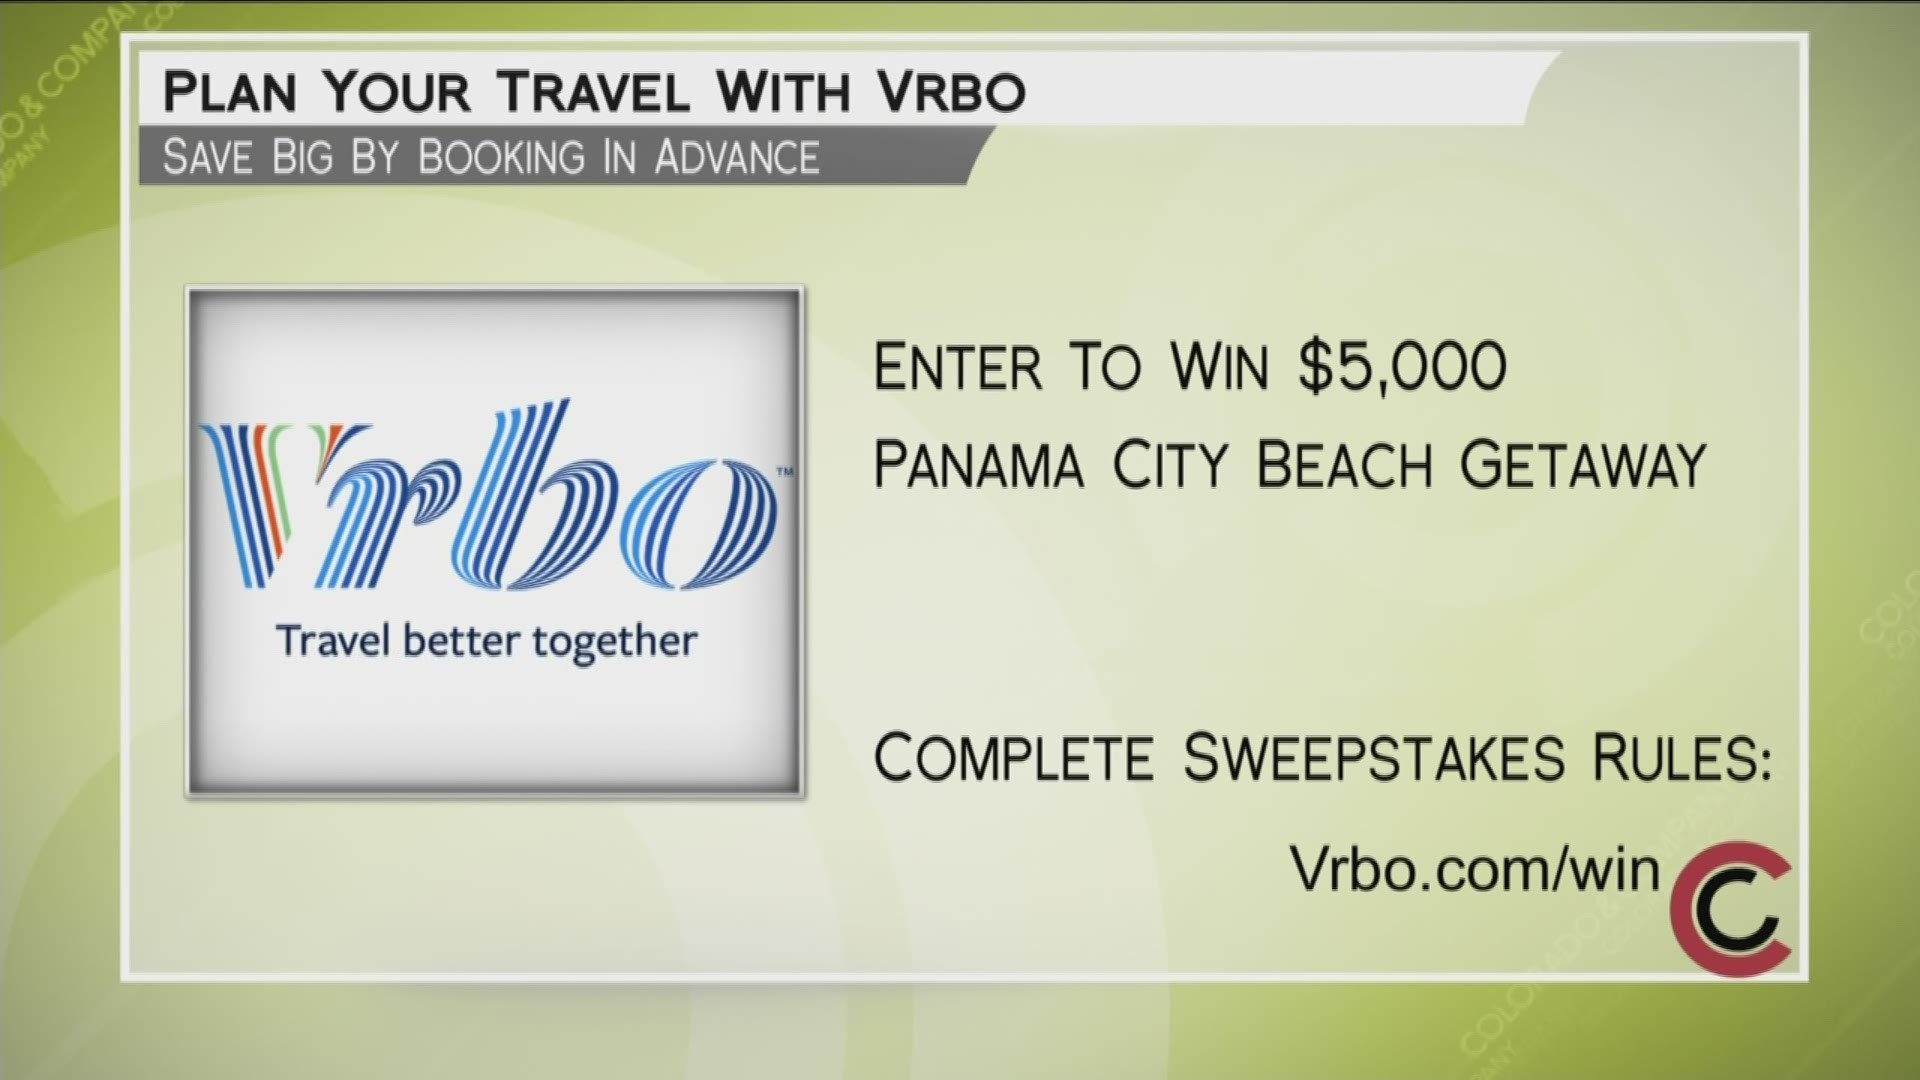 Learn more about great getaways and find out how to win a $5,000 trip to Panama City Beach at VRBO.com/Win.